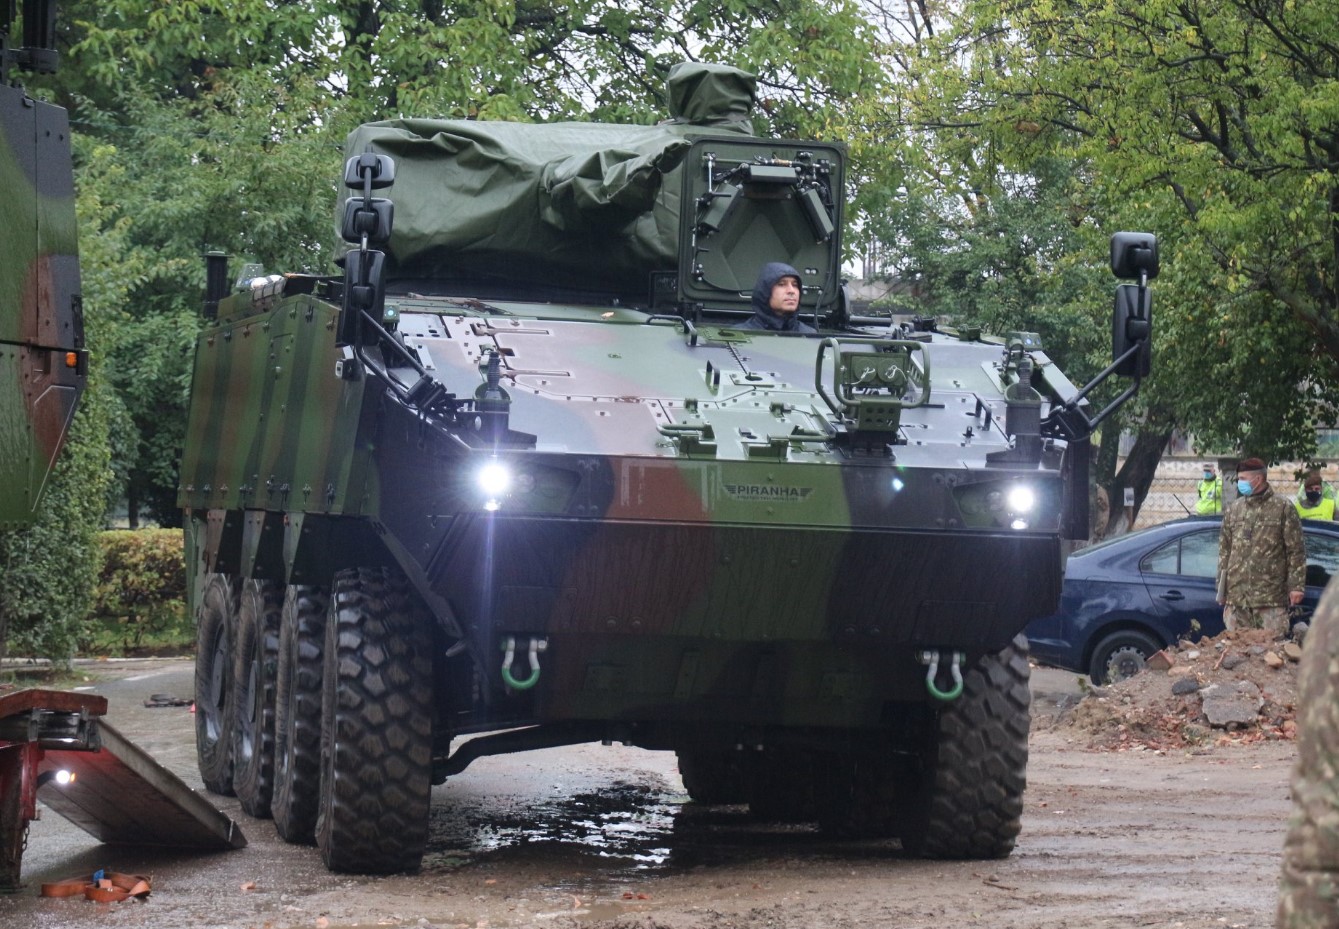 Romania Takes Delivery Of First Piranha 5 Wheeled Armored Vehicles